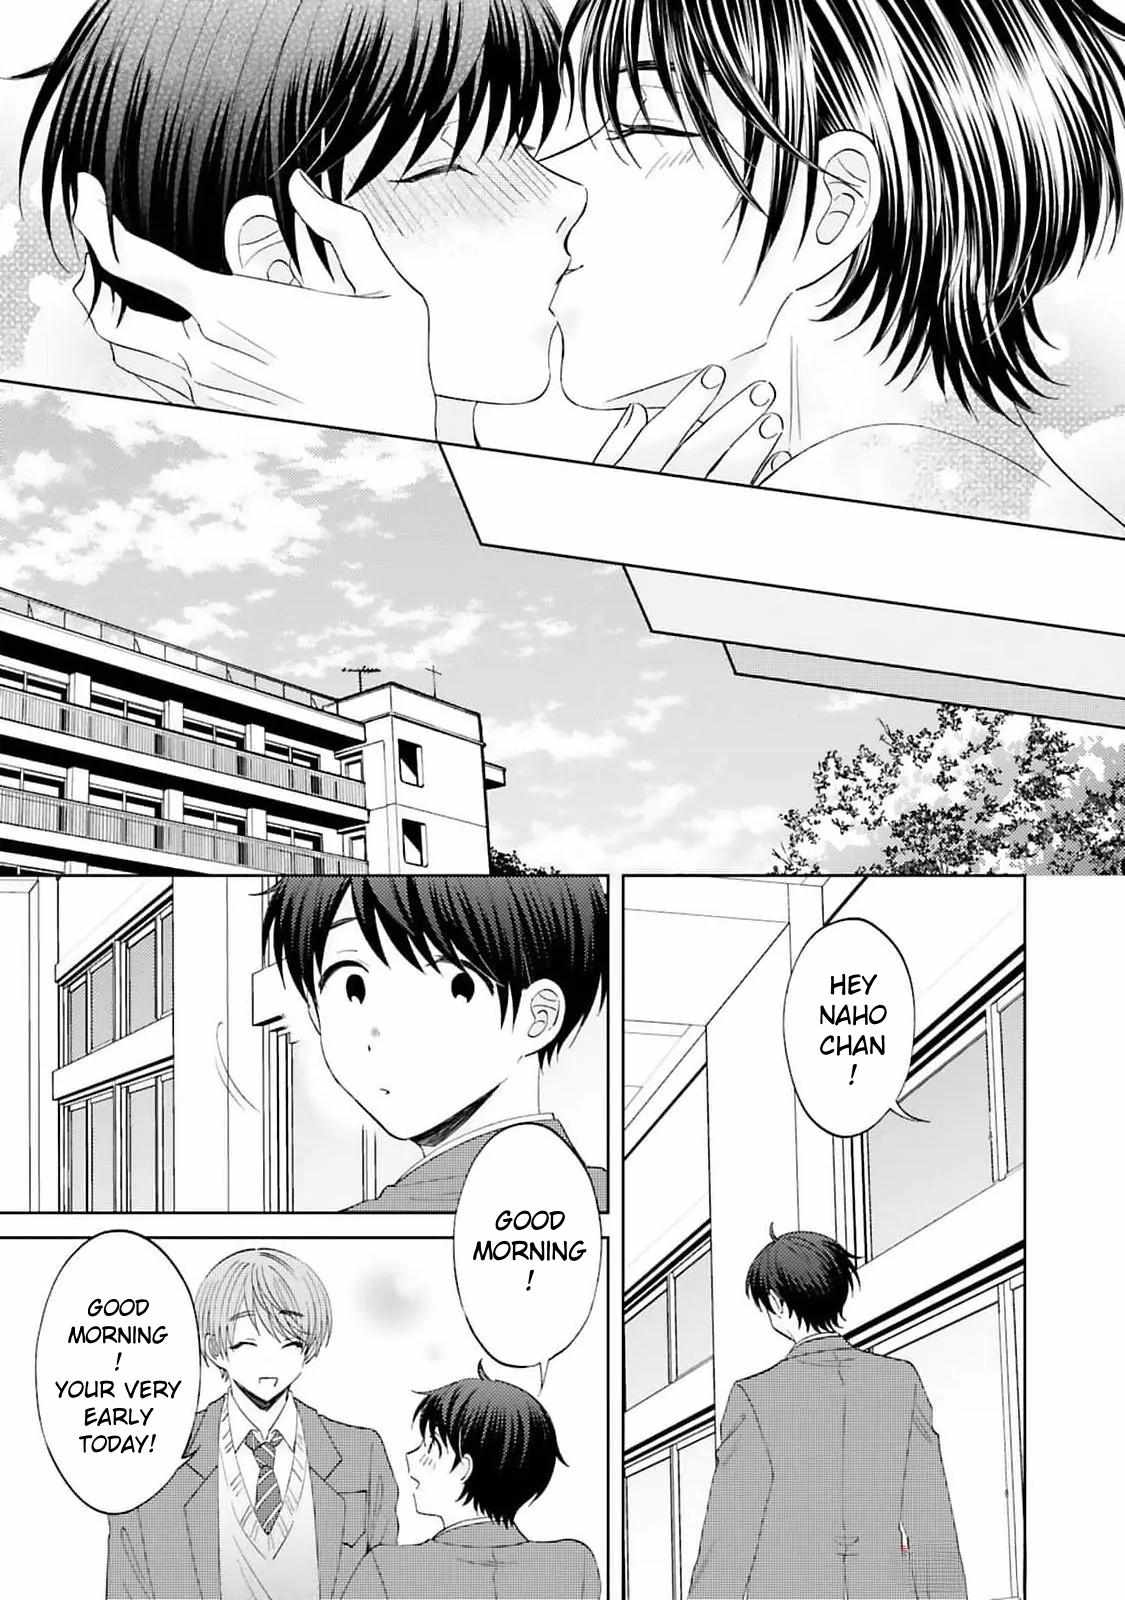 My Cutie Pie -An Ordinary Boy And His Gorgeous Childhood Friend- 〘Official〙 - 9 page 29-a07b5613